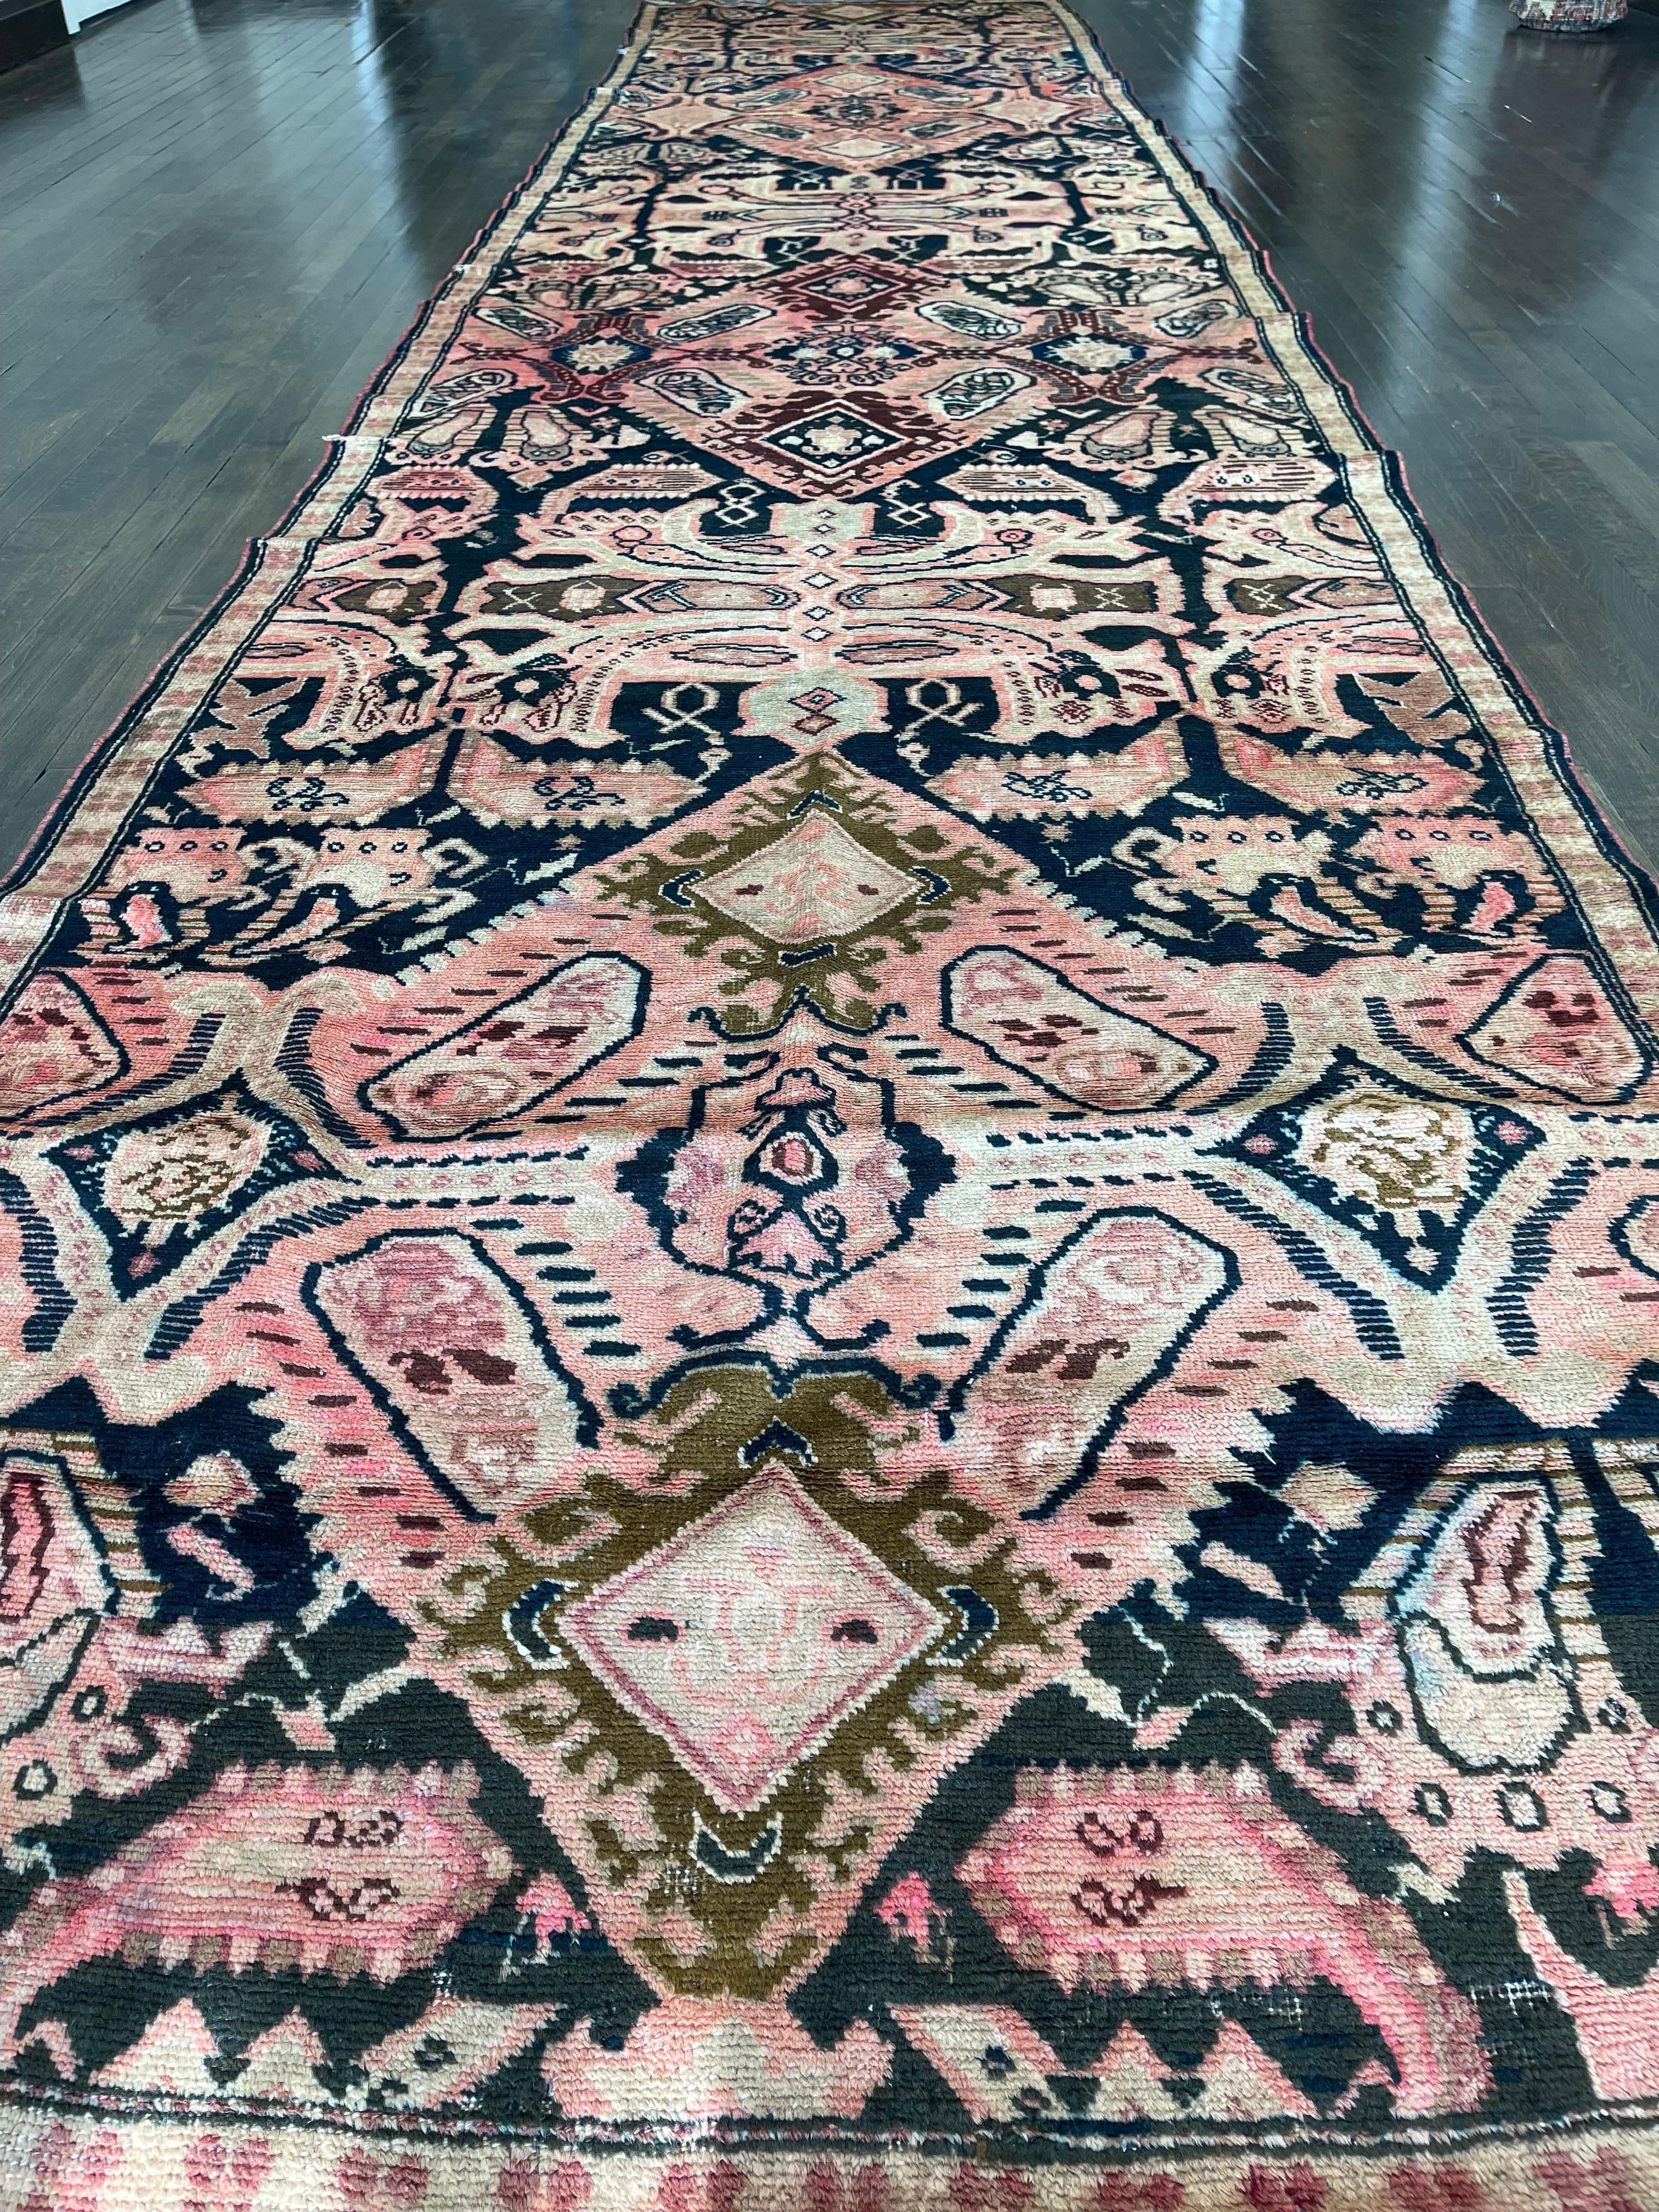 An unusually long Karabagh runner,created in the most southerly of the main caucasian provinces, featuring Dragon motifs on a black field.The rug is decorated with three 